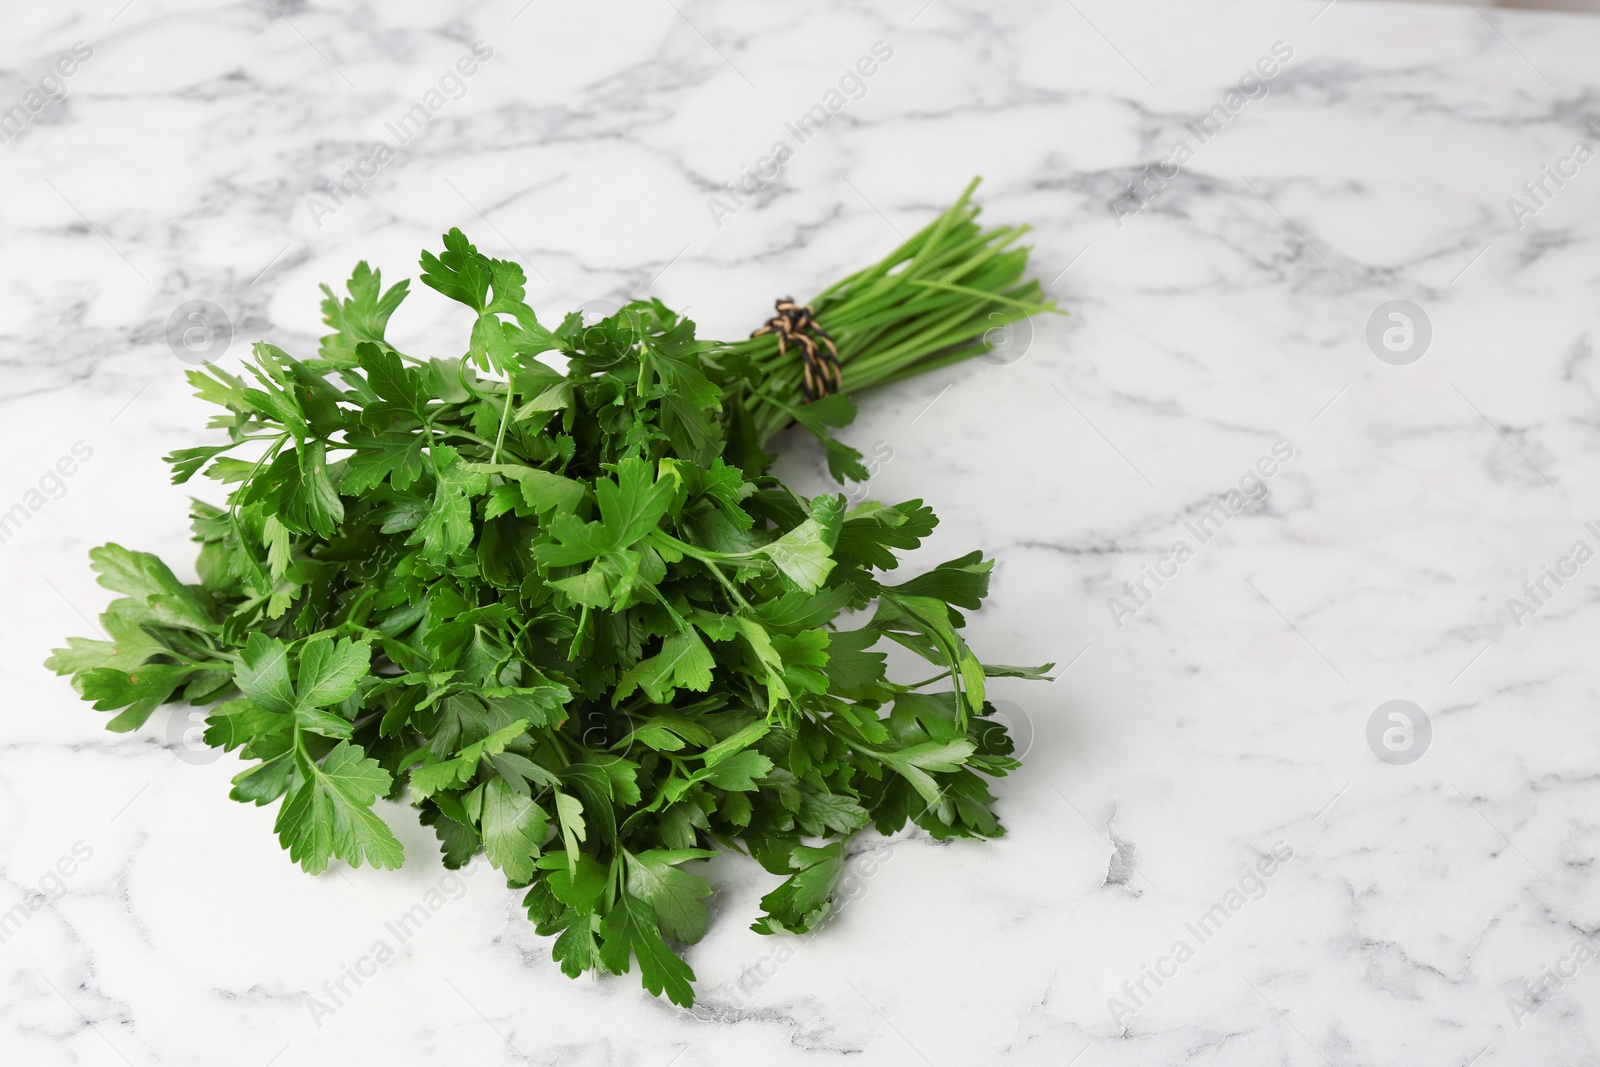 Photo of Bunch of fresh green parsley on marble background